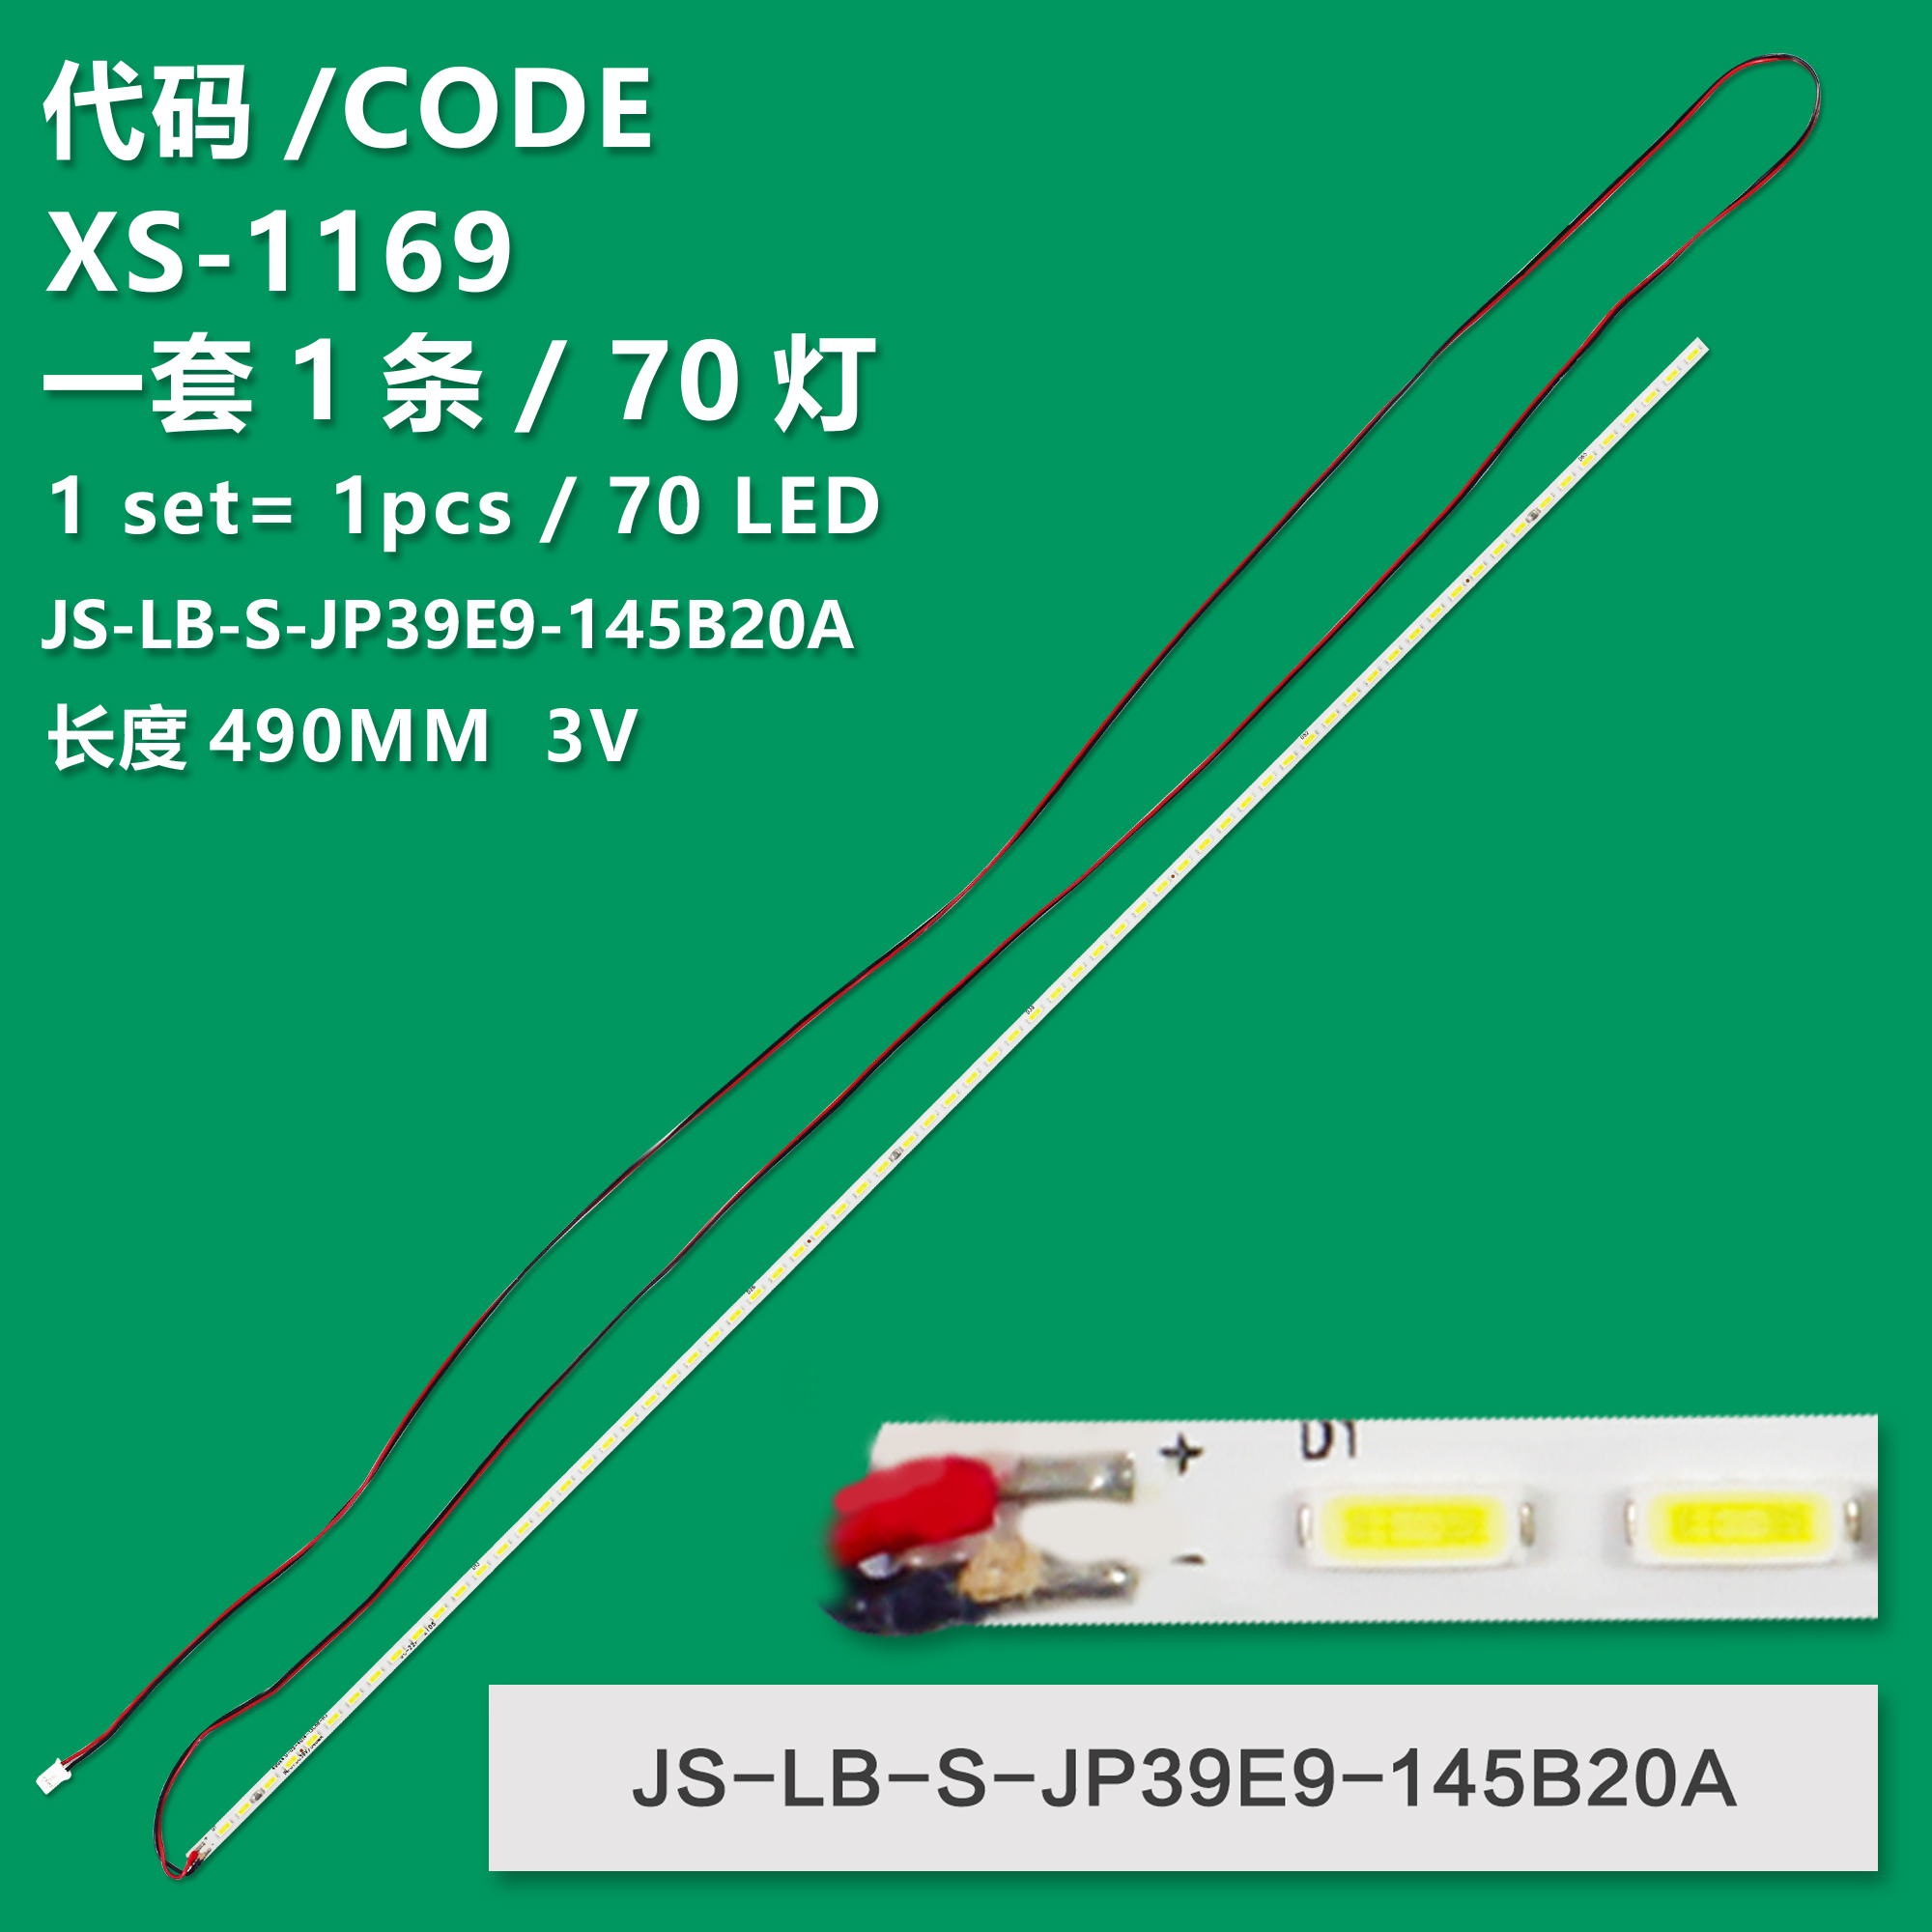 XS-1169 New LCD TV Backlight Strip JS-LB-S-JP39E9-145B20A Is Suitable For Xianke 8409 Haipu LE40B99 Xiaobawang 40 Inches